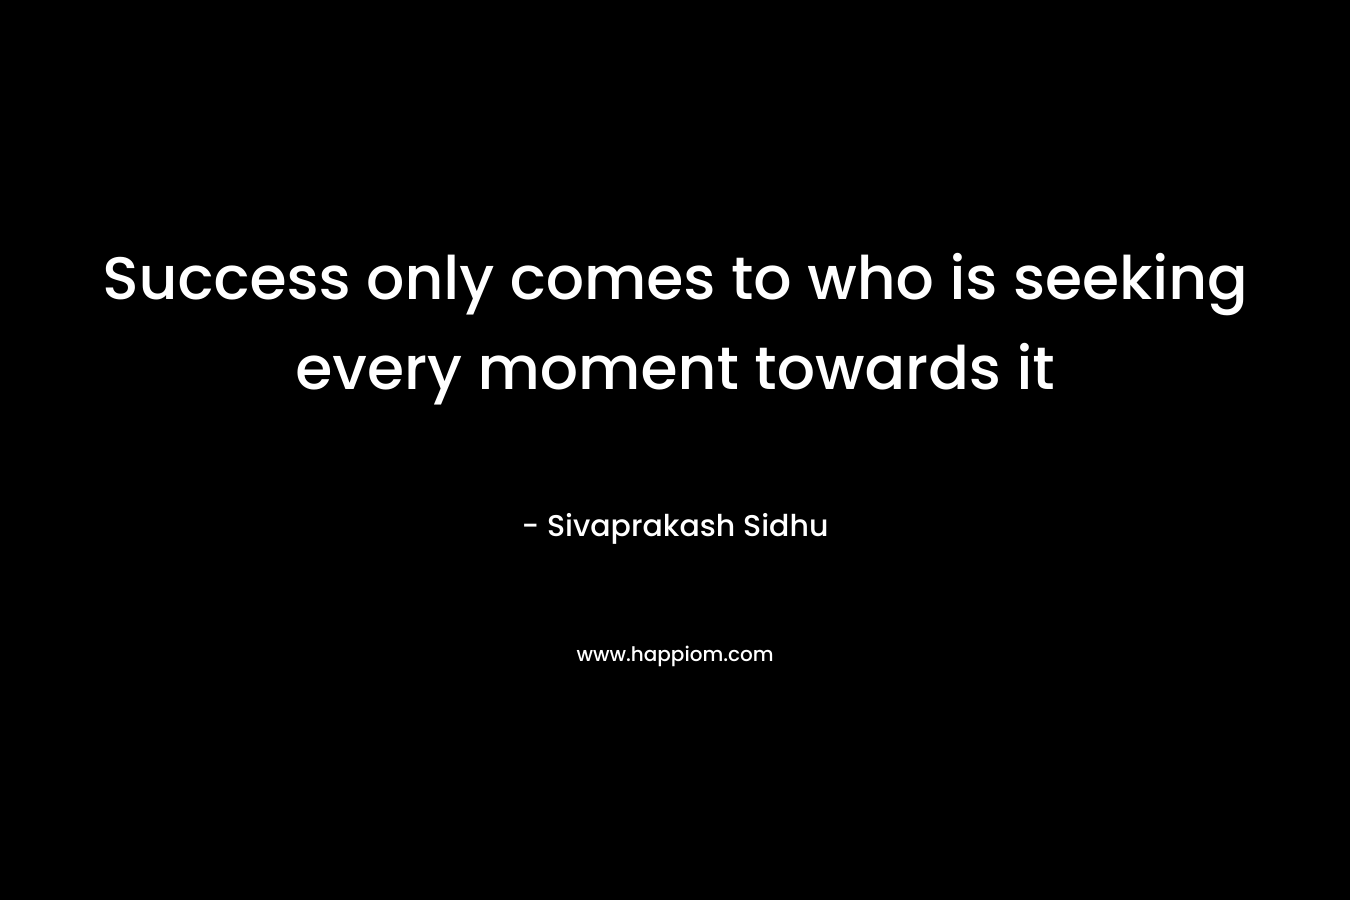 Success only comes to who is seeking every moment towards it